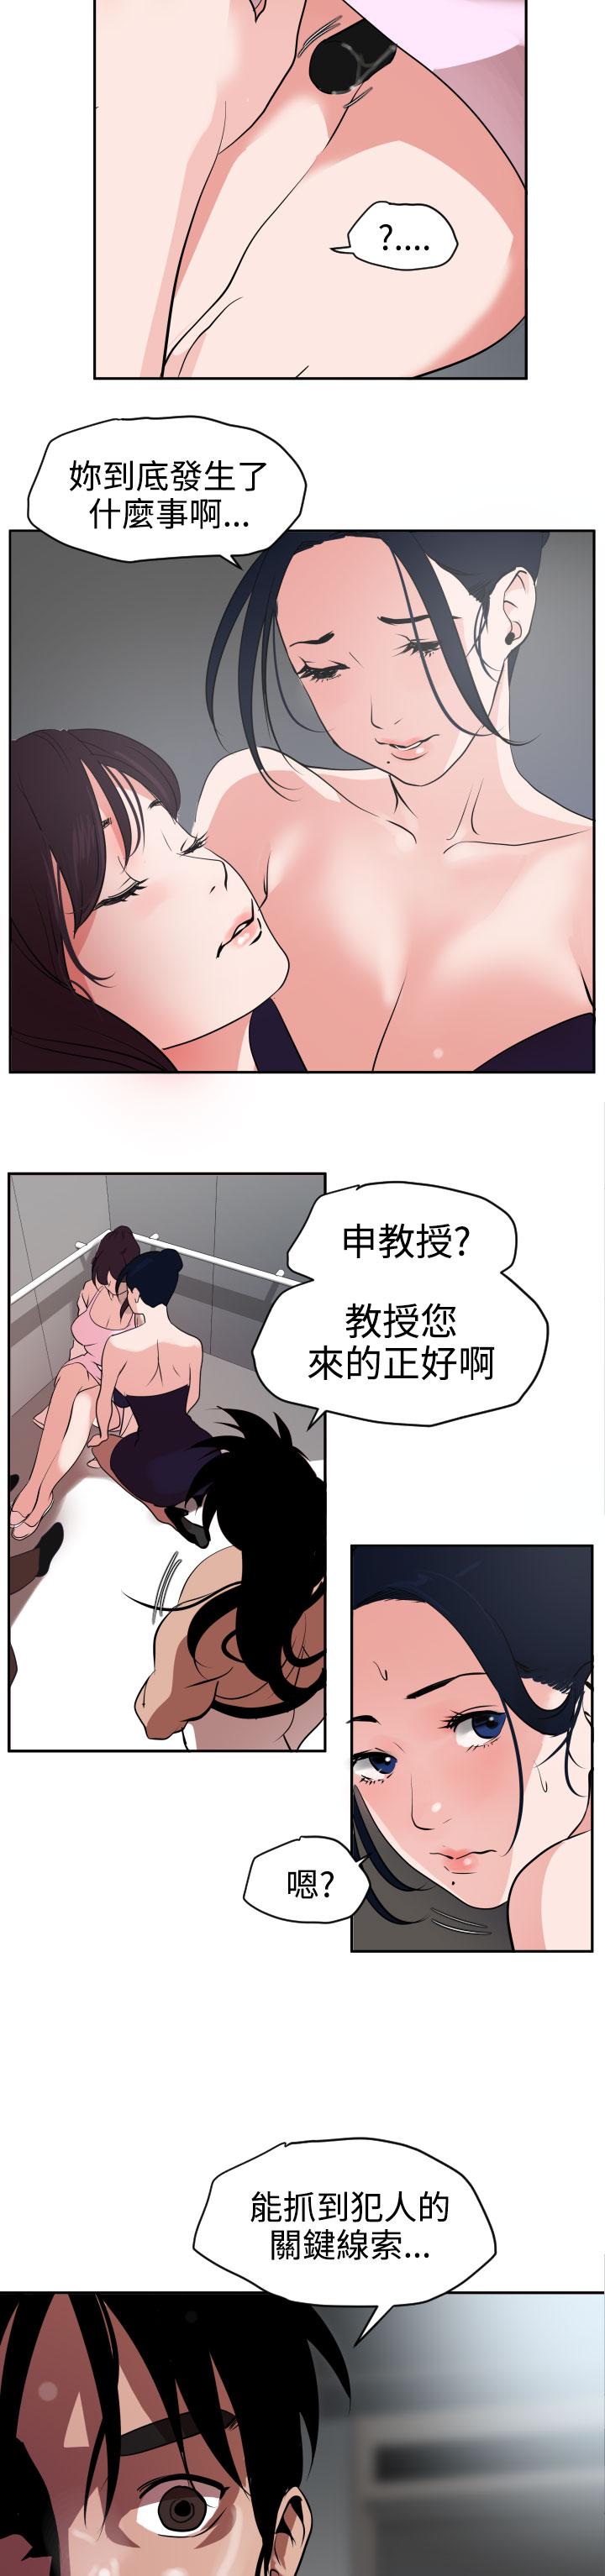 Desire King (慾求王) Ch.1-16 (chinese) 441